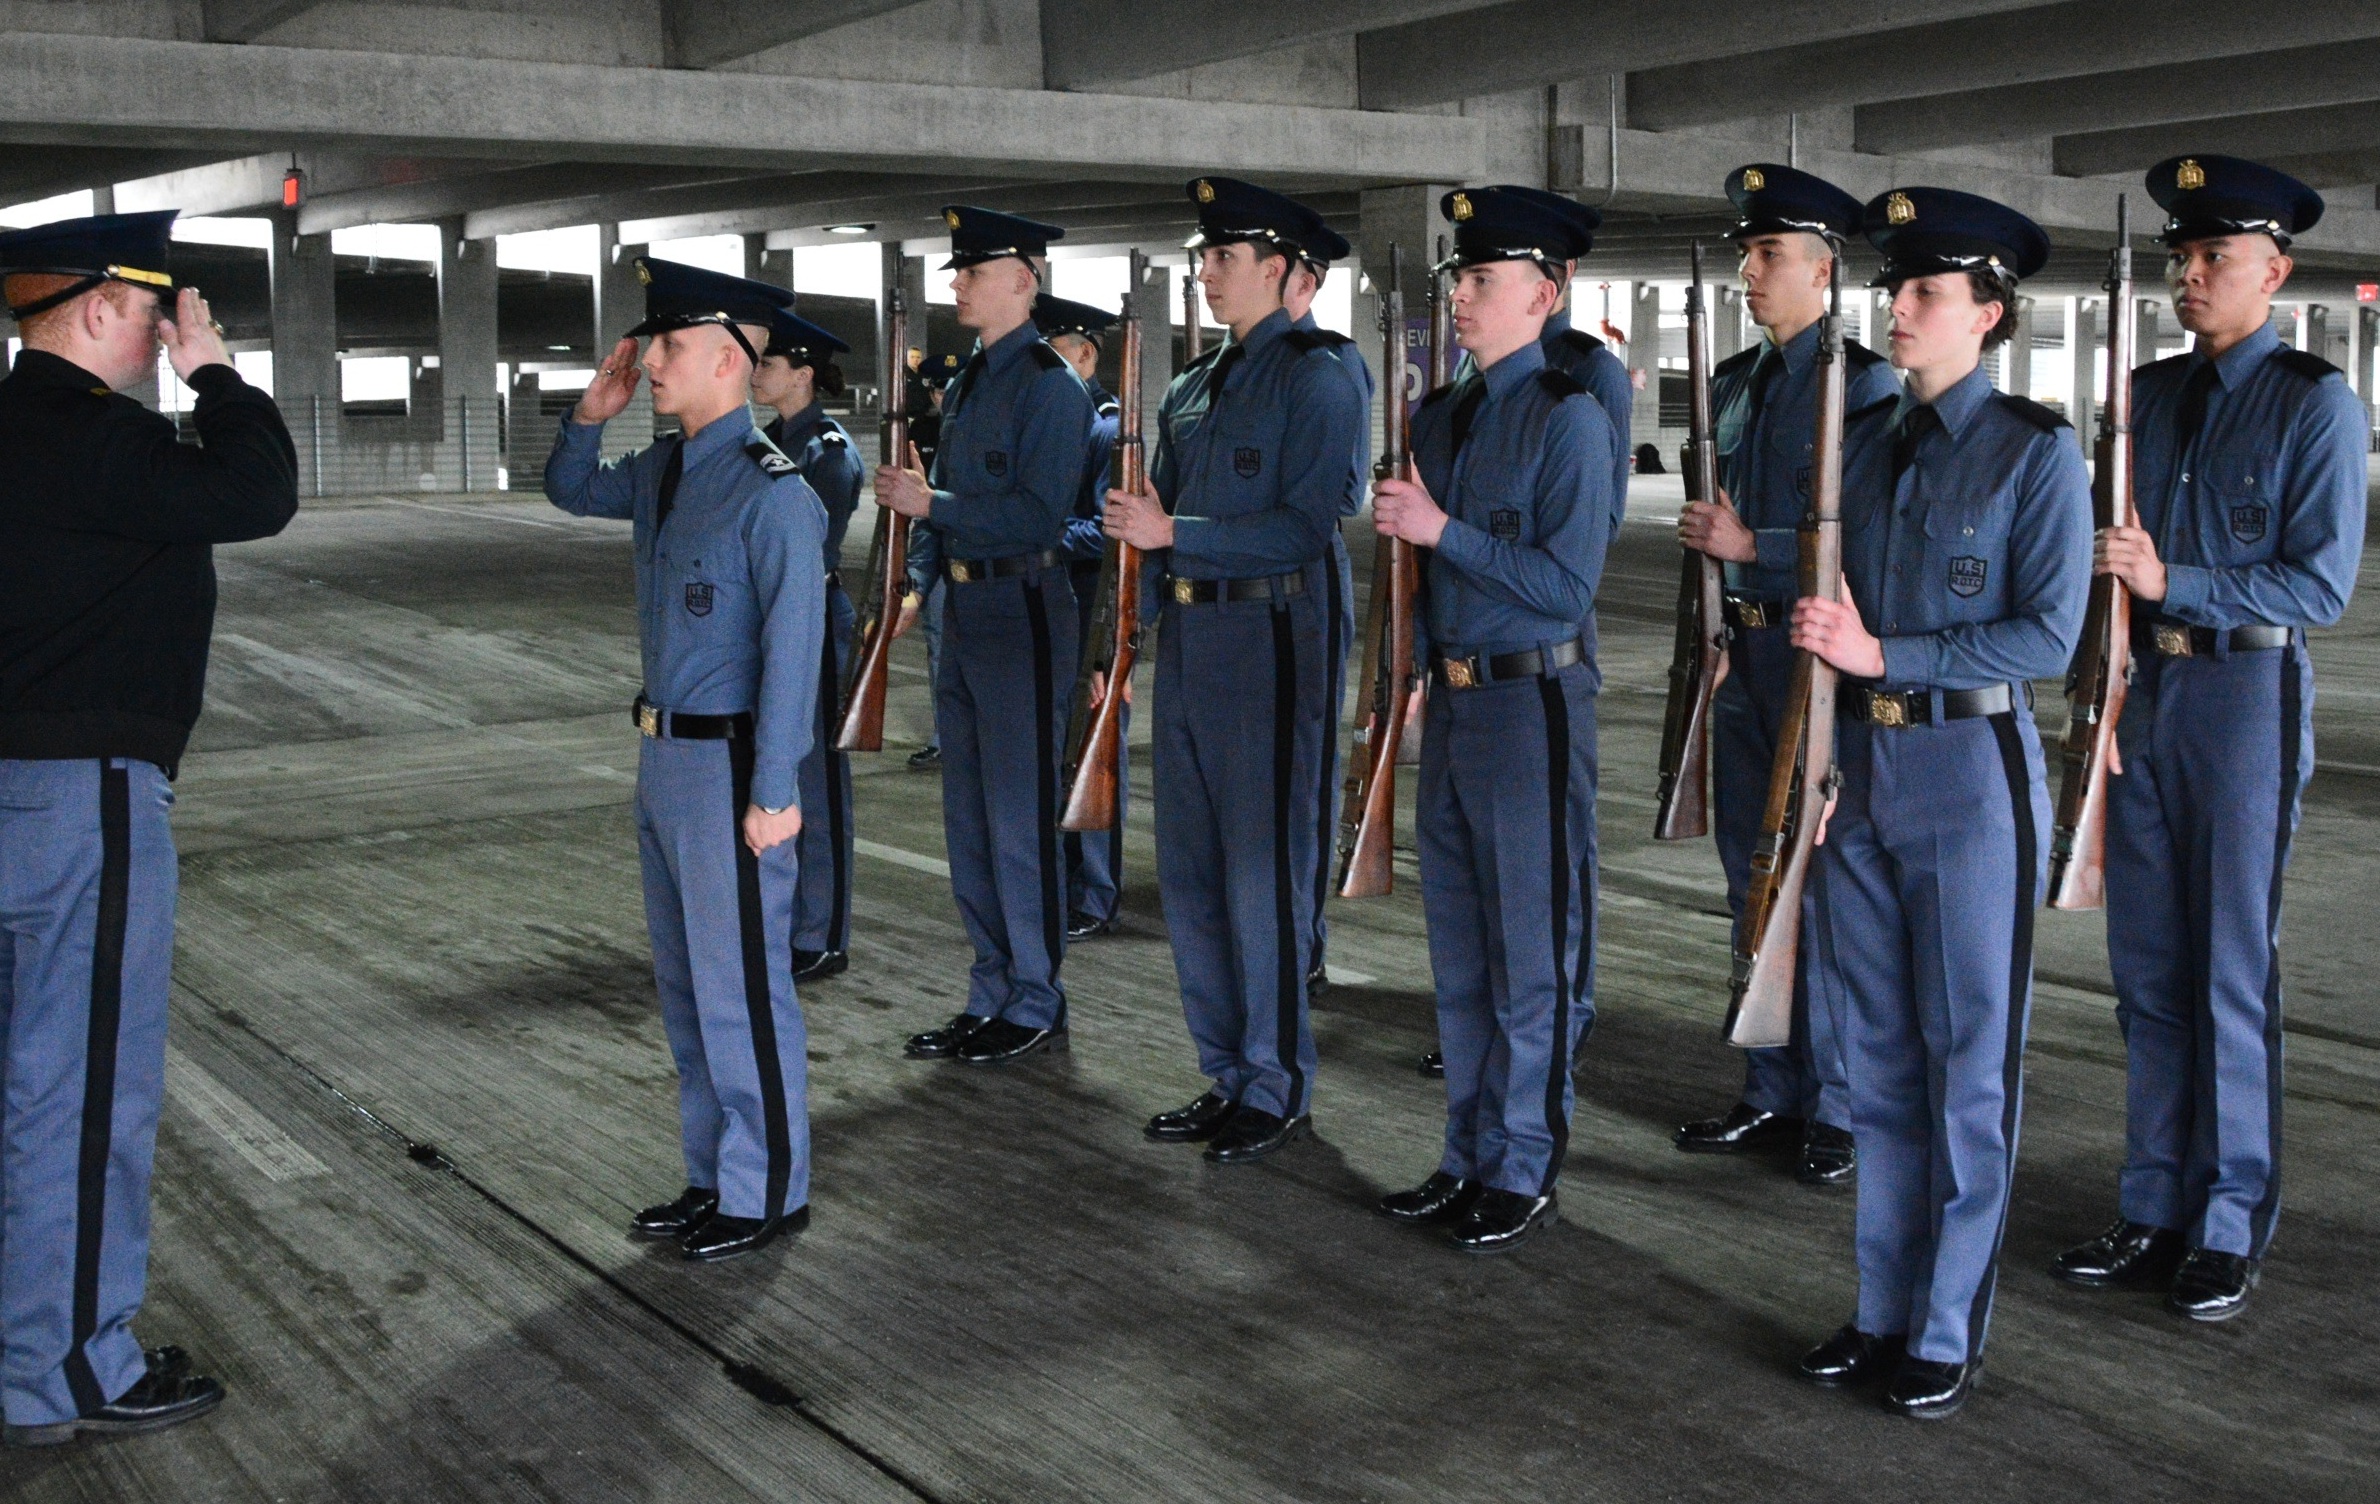 A cadet squad reports in as part of the Jaffe Eager Squad drill competition in the Turner Street parking garage.